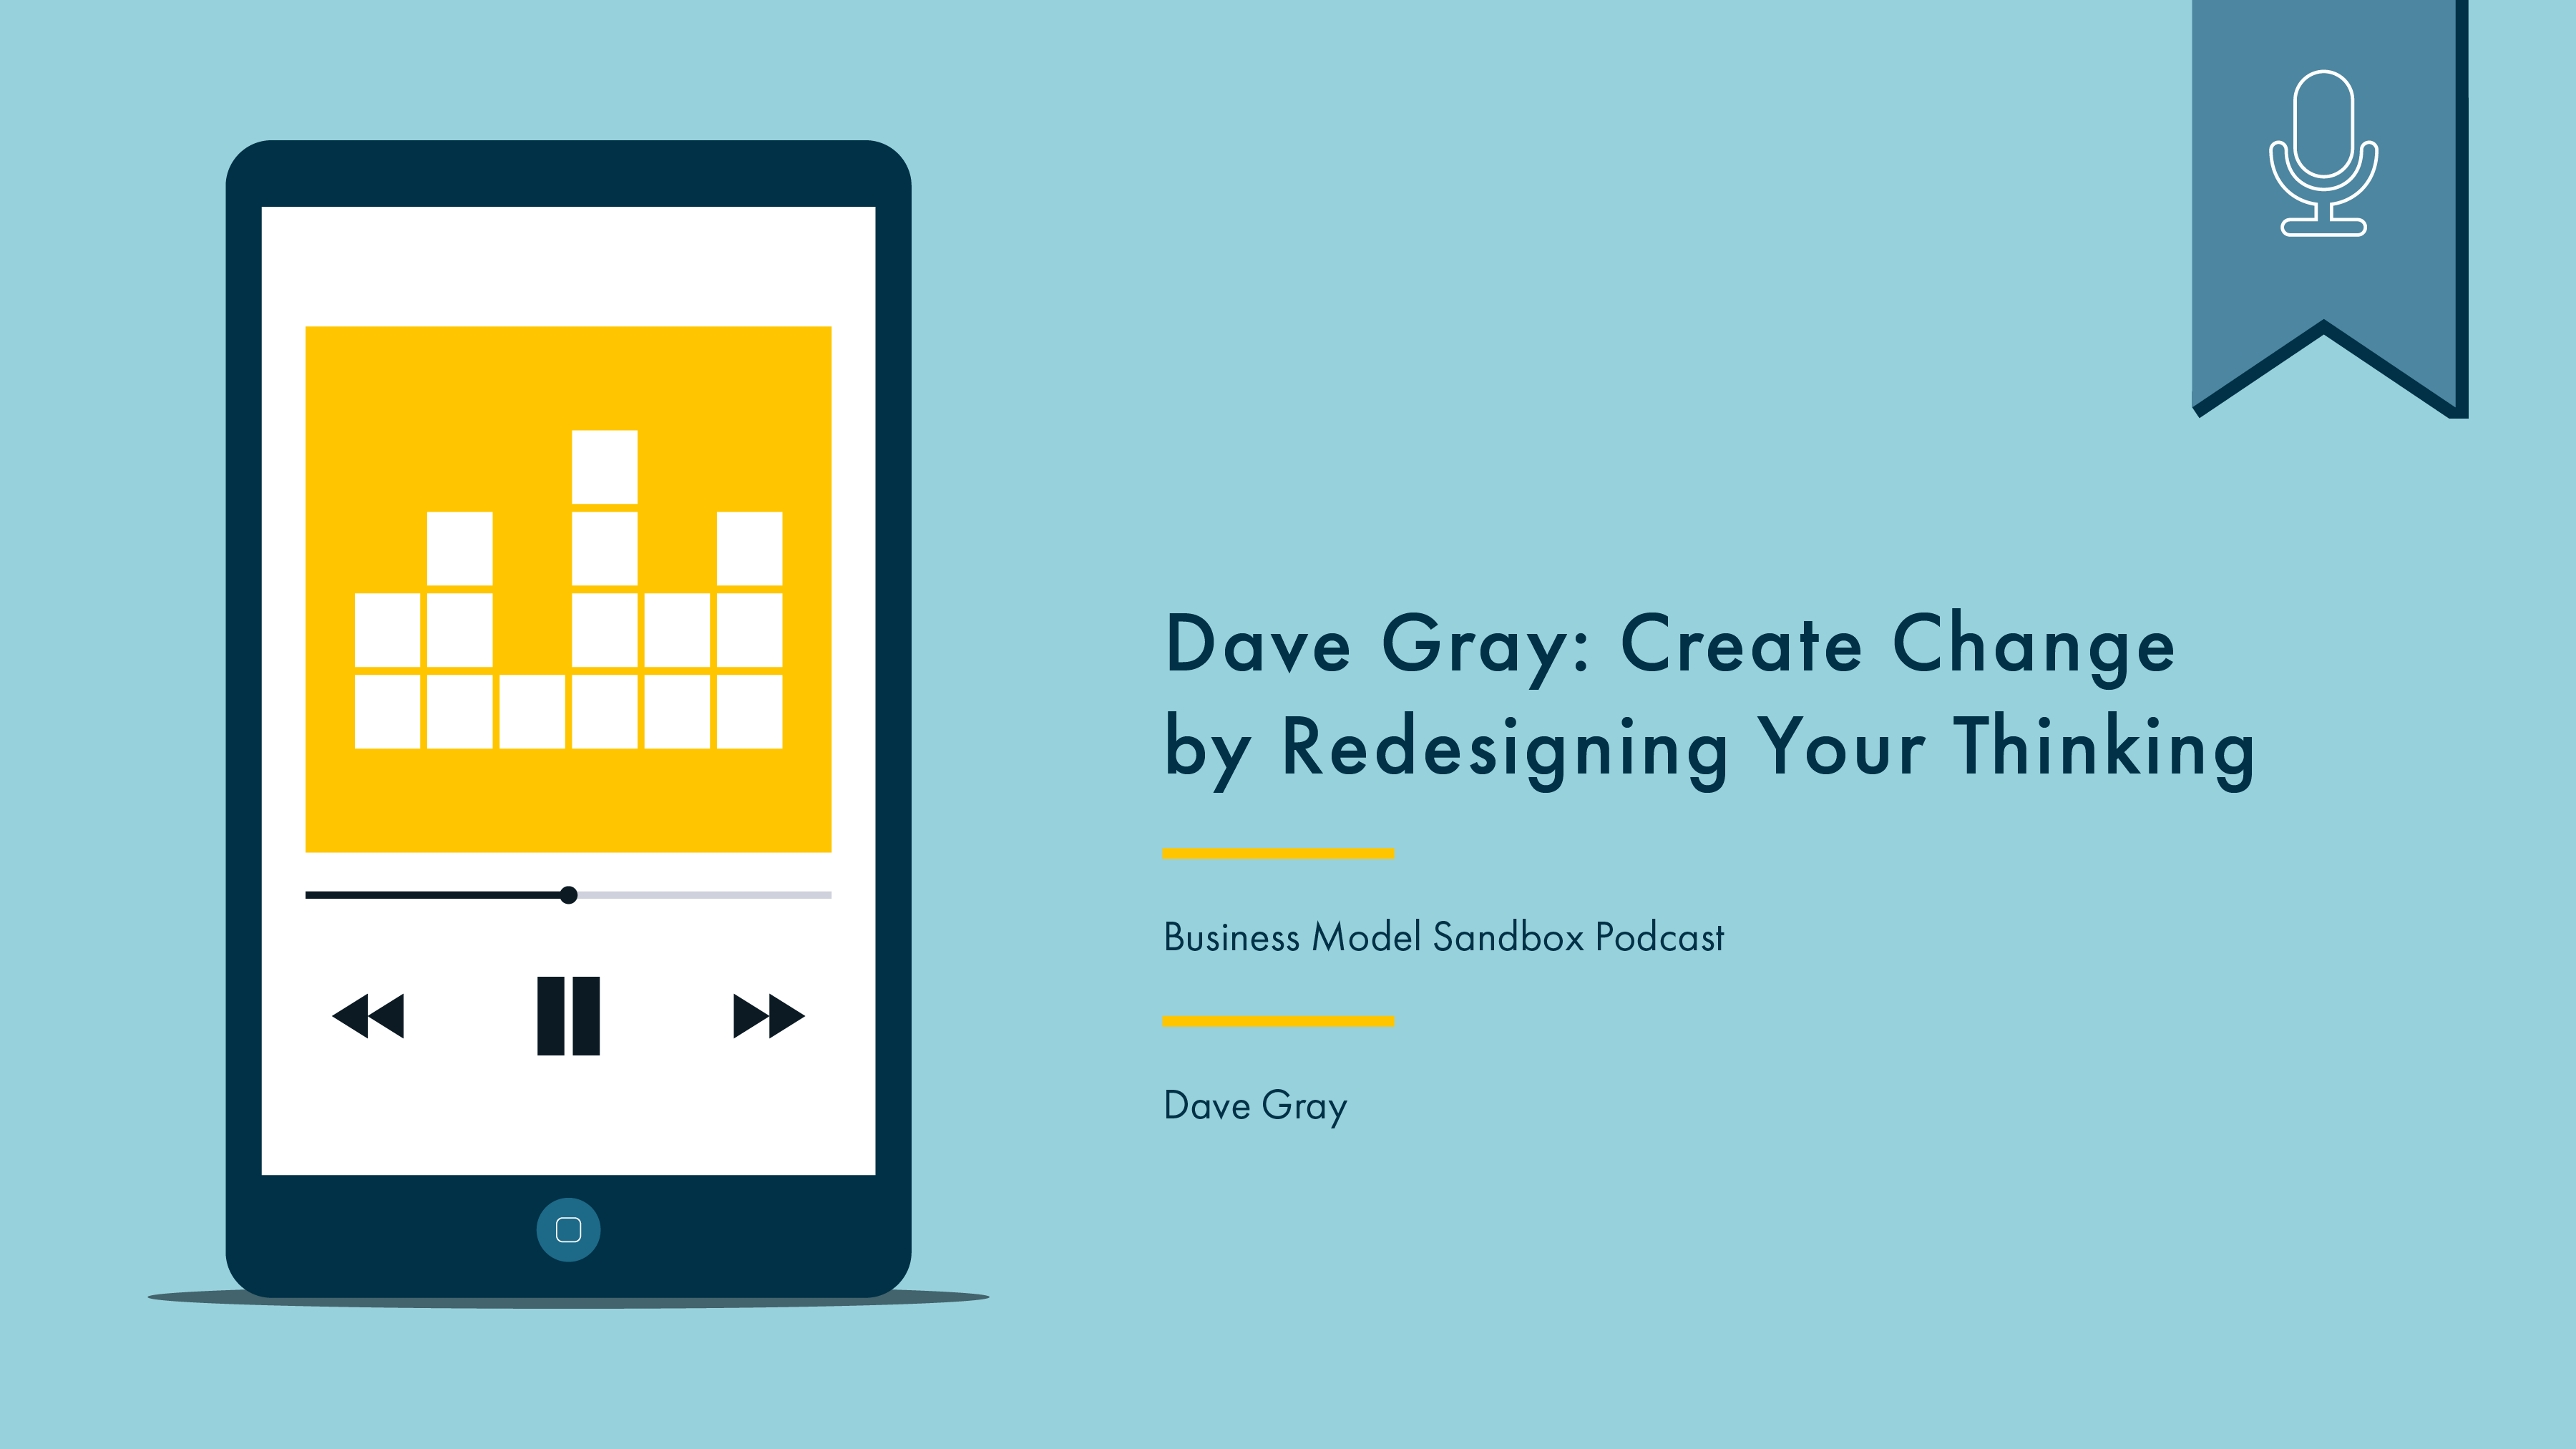 Phone with podcast artwork on the left. On the right reads “Dave Gray: Create Change by Redesigning Your Thinking, Business Model Sandbox Podcast, Dave Gray.” Above is a blue flag with a white icon denoting that this is a podcast.